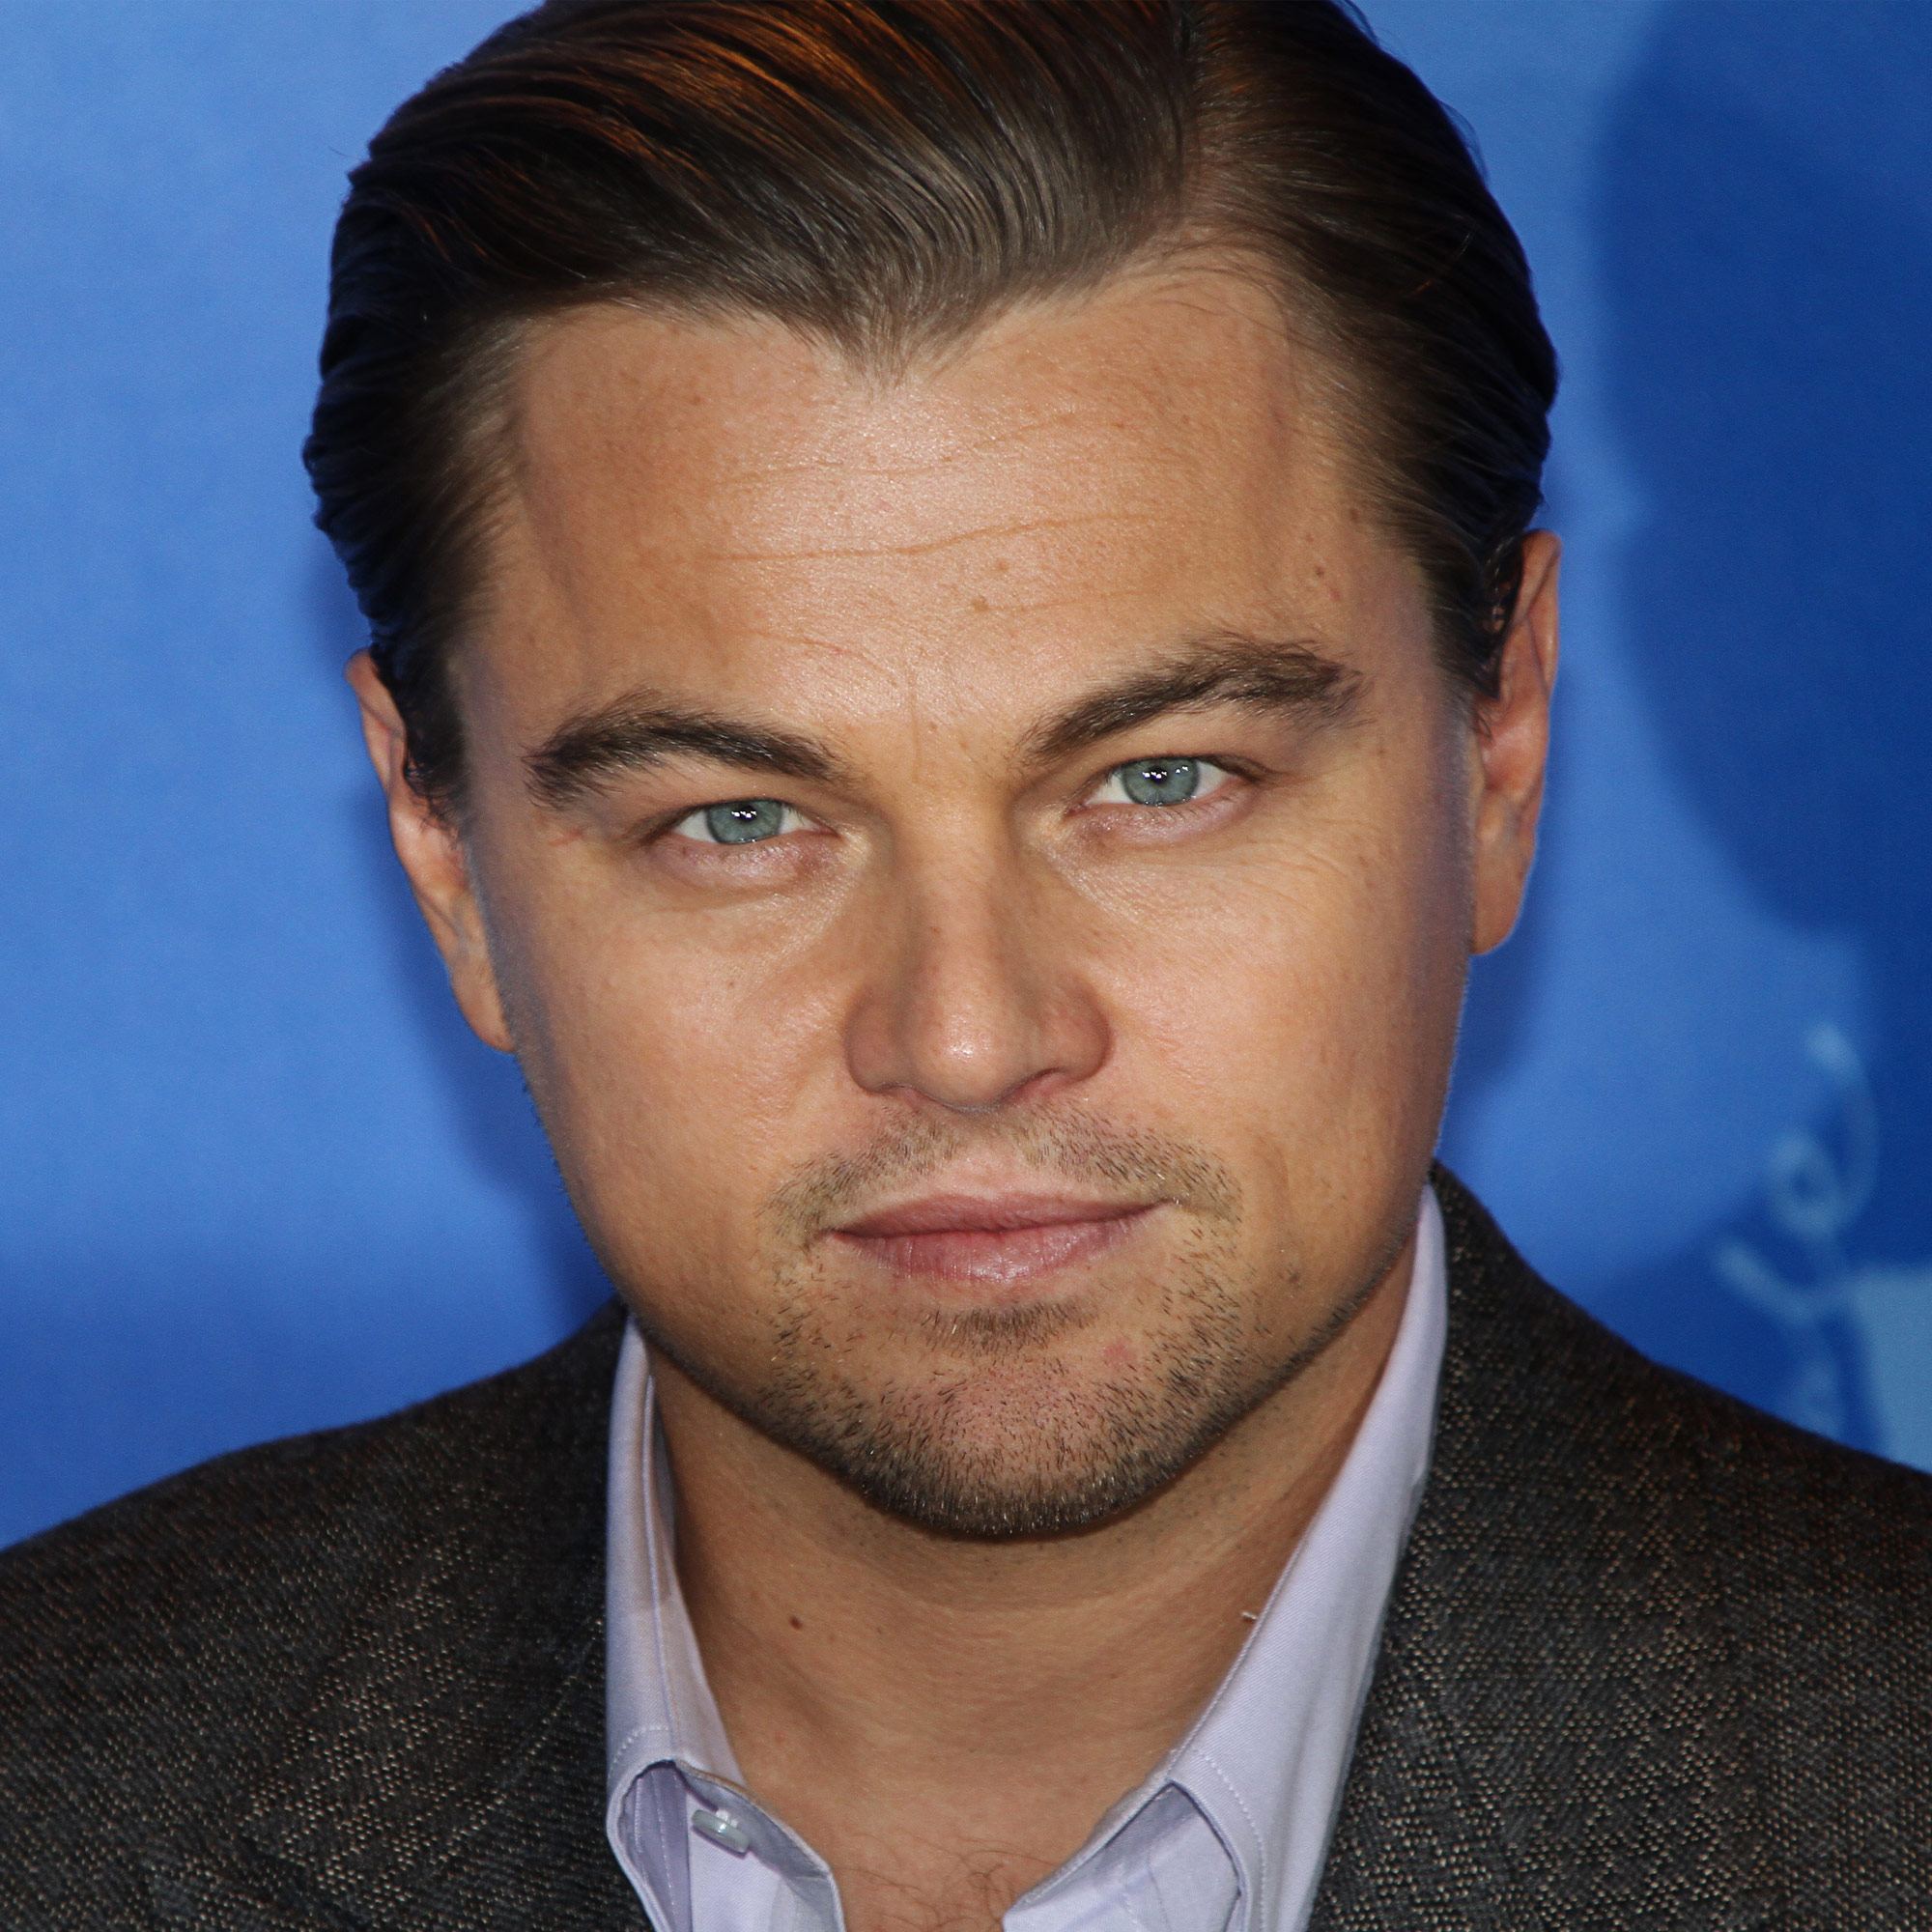 DiCaprio Claims Earth Has 9-Years Left, But Still Went Yachting With 24-Year-Old Girlfriend